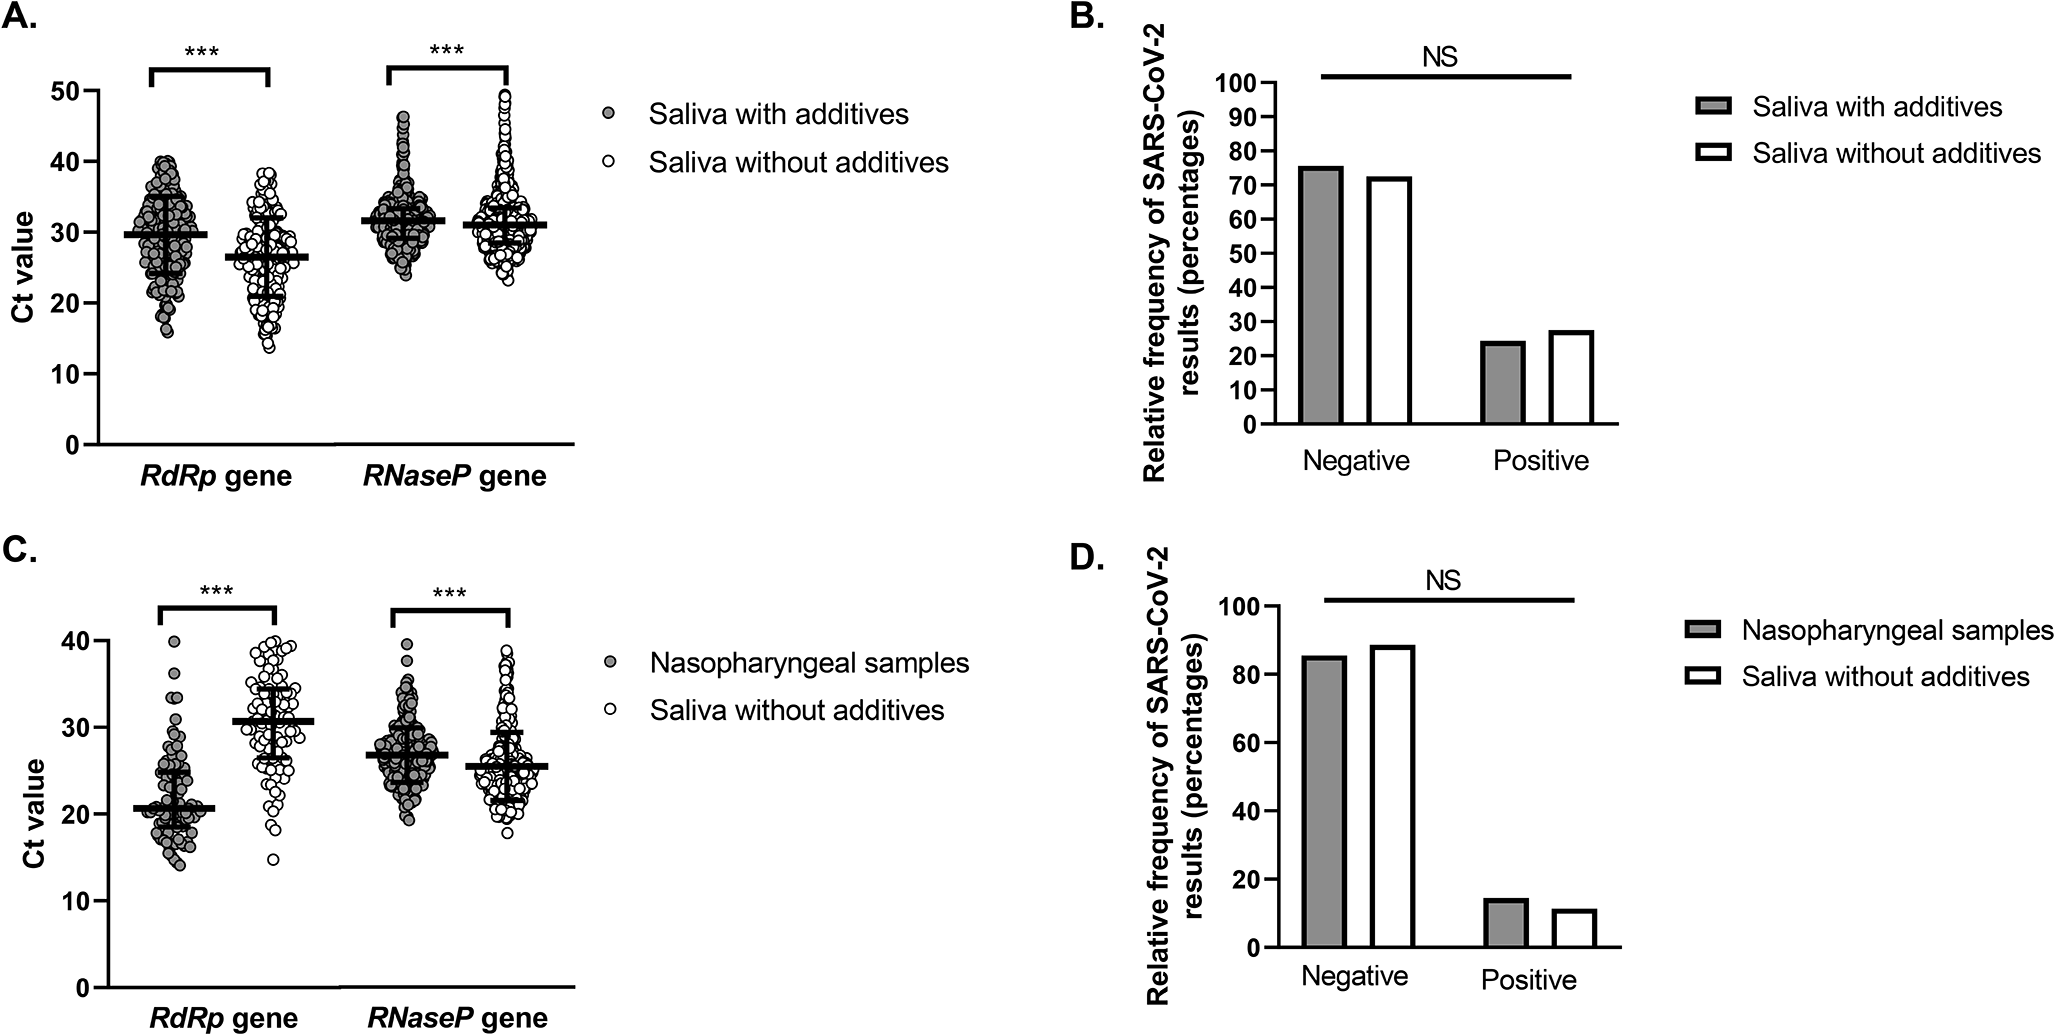 Diagnostic performance, stability, and acceptability of self-collected saliva without additives for SARS-CoV-2 molecular diagnosis